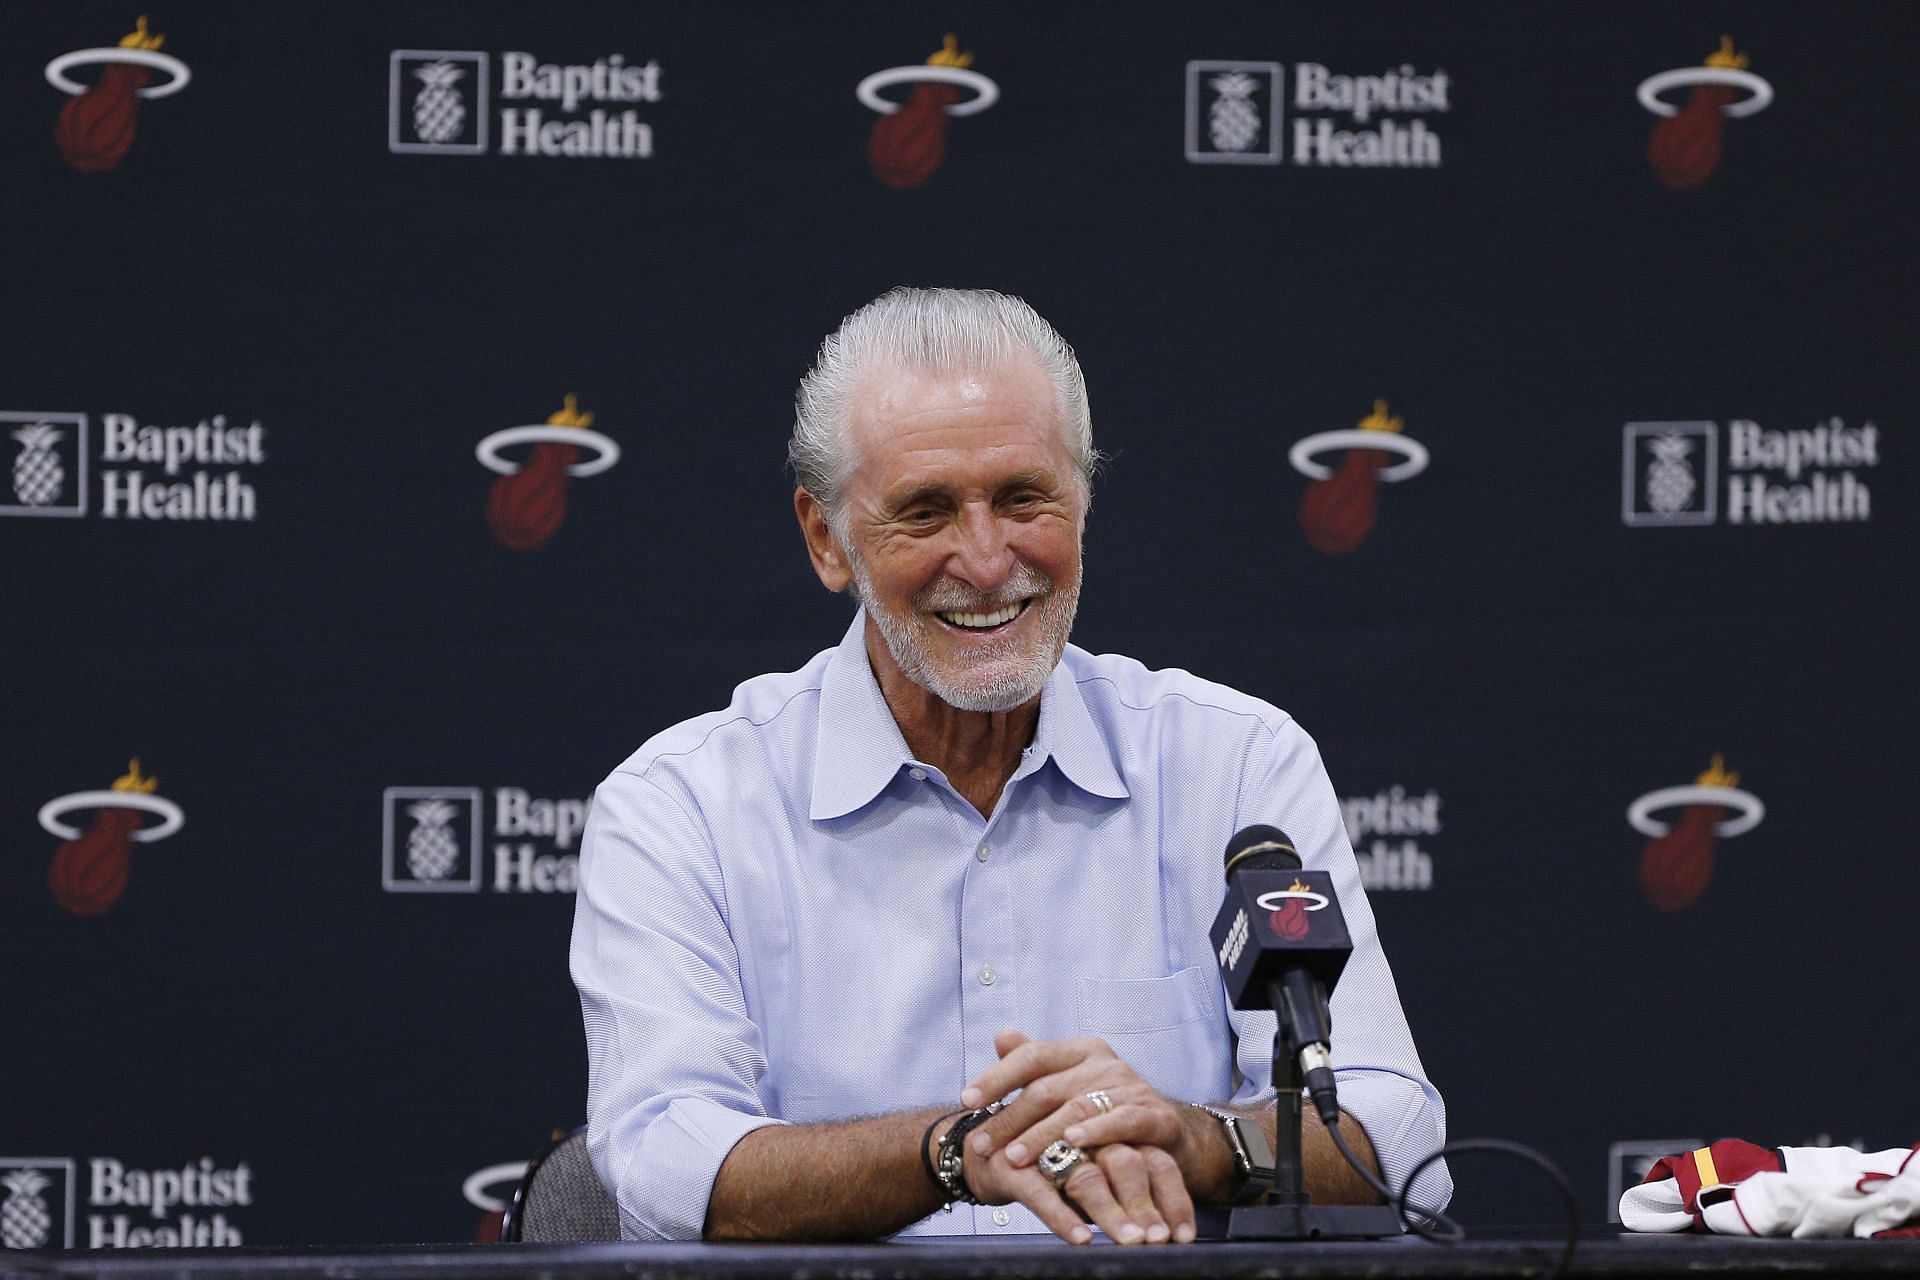 President Pat Riley of the Miami Heat addresses the media during the introductory press conference for Jimmy Butler at American Airlines Arena on September 27, 2019 in Miami, Florida.